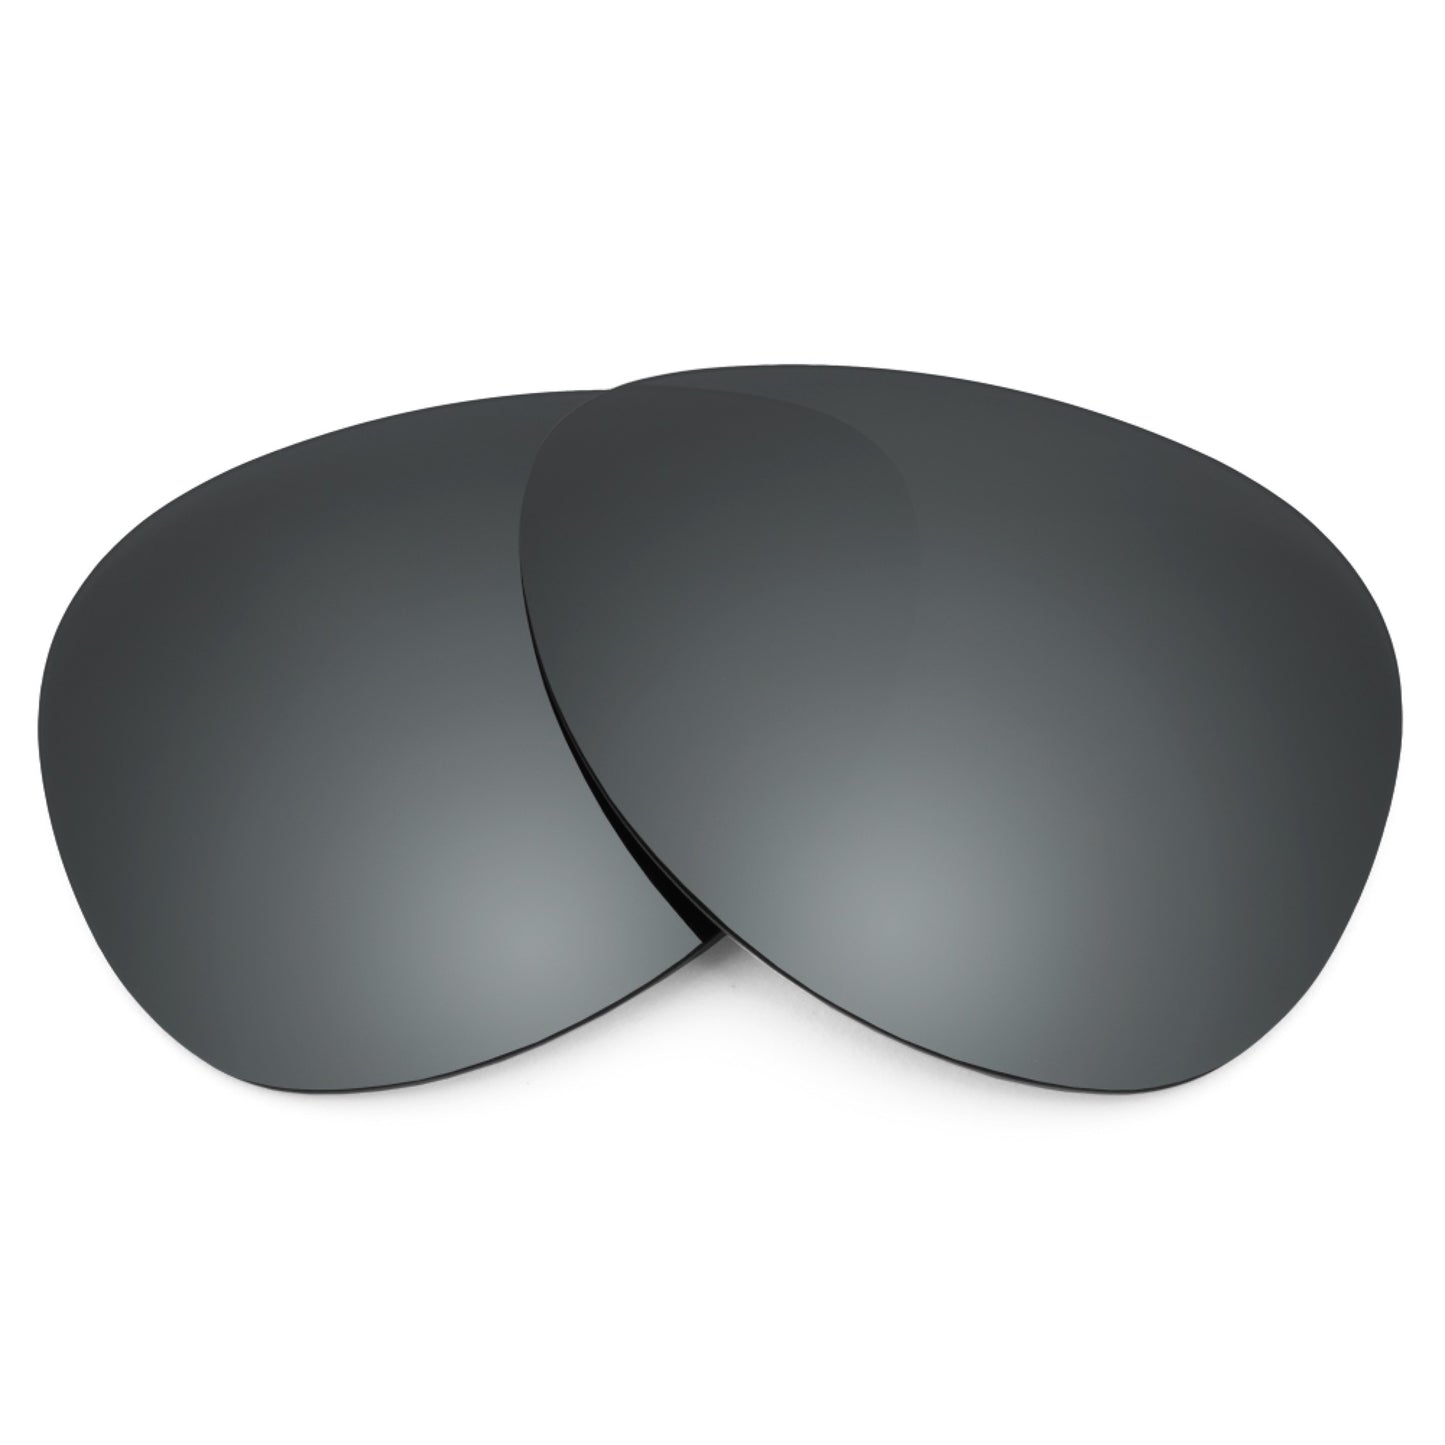 Revant replacement lenses for Ray-Ban RB3533 57mm Non-Polarized Black Chrome